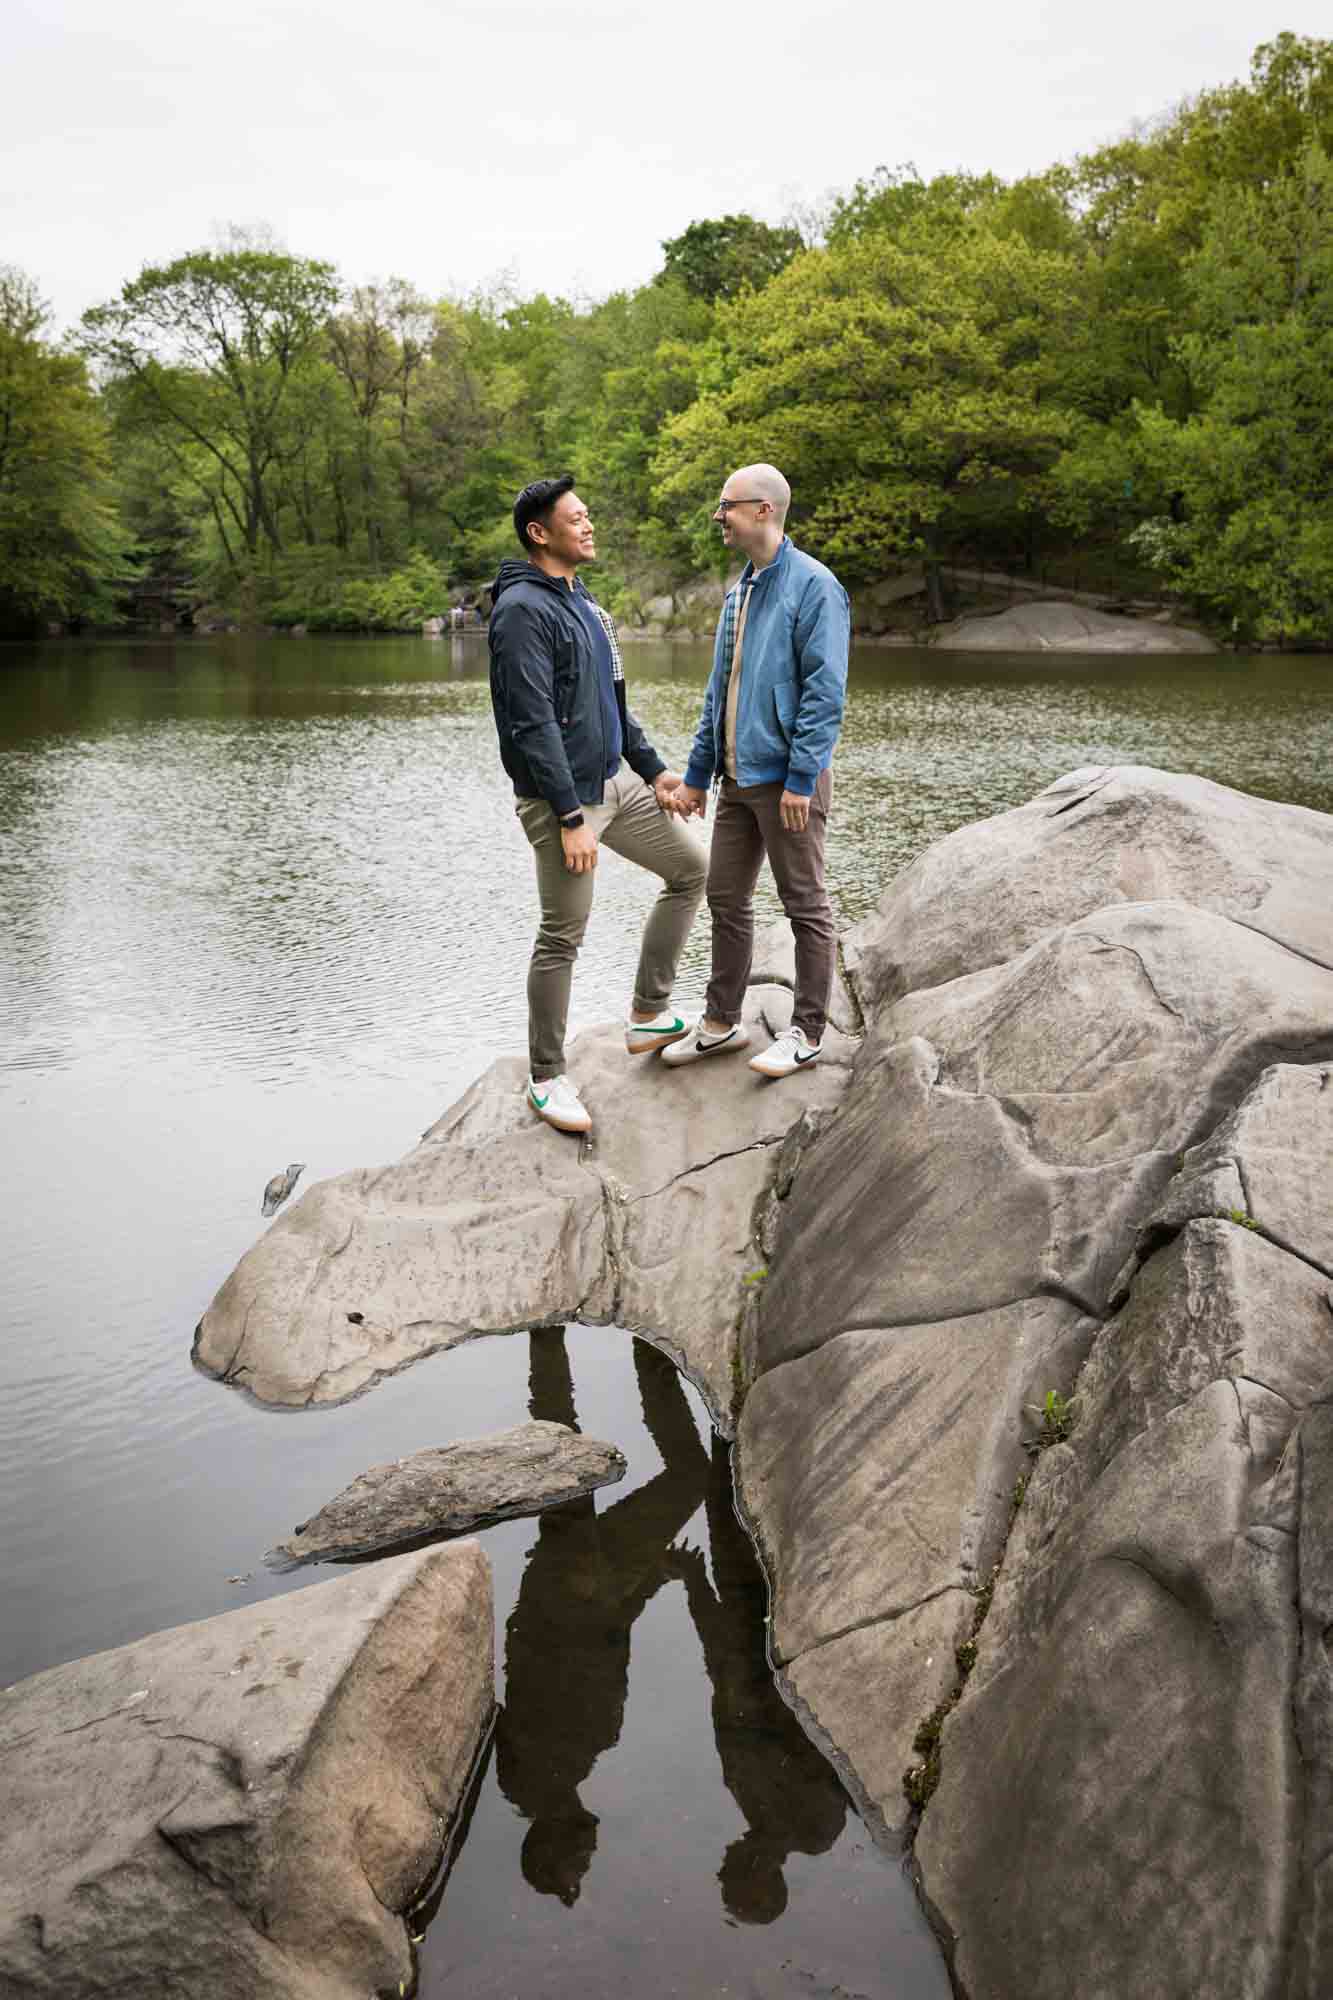 Two men standing on rock with reflection in water